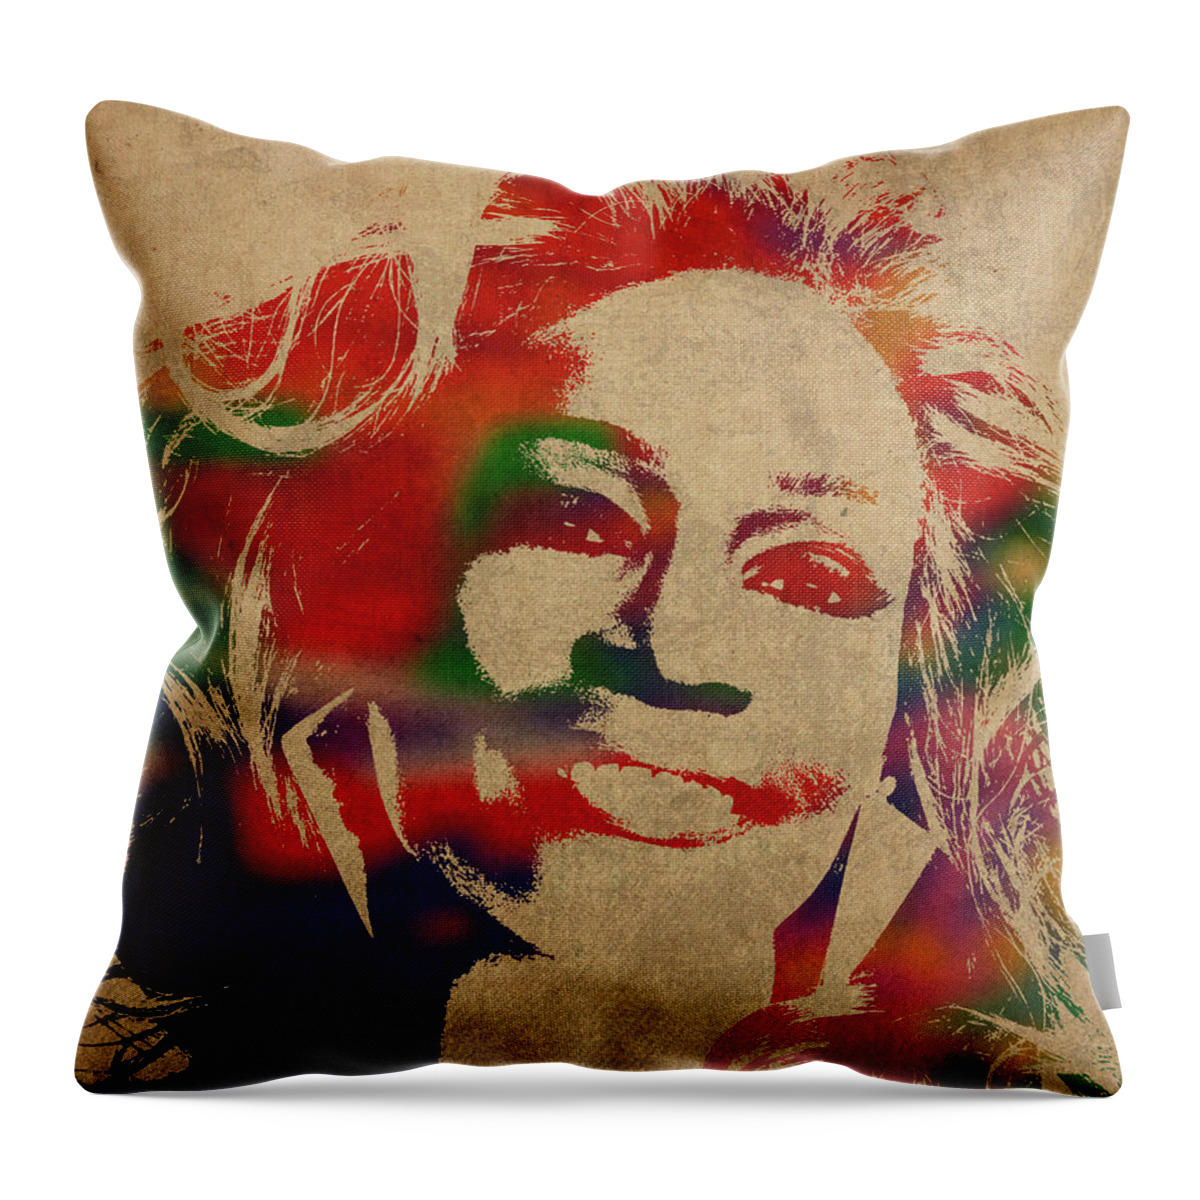 Whitney Houston Throw Pillow featuring the mixed media Whitney Houston Watercolor Portrait by Design Turnpike